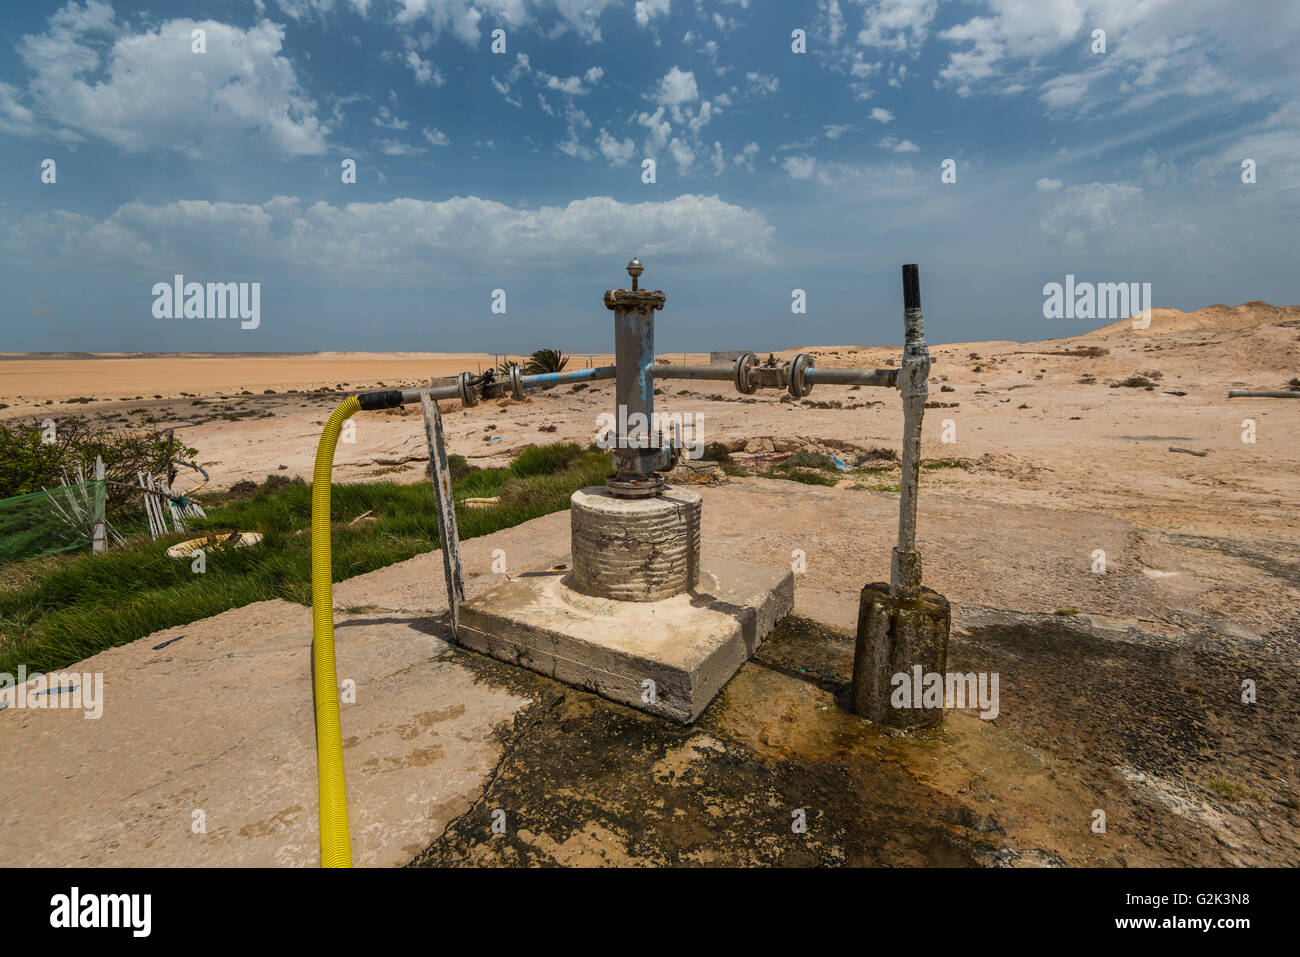 Water well in sandy desert with blue cloudy sky Stock Photo